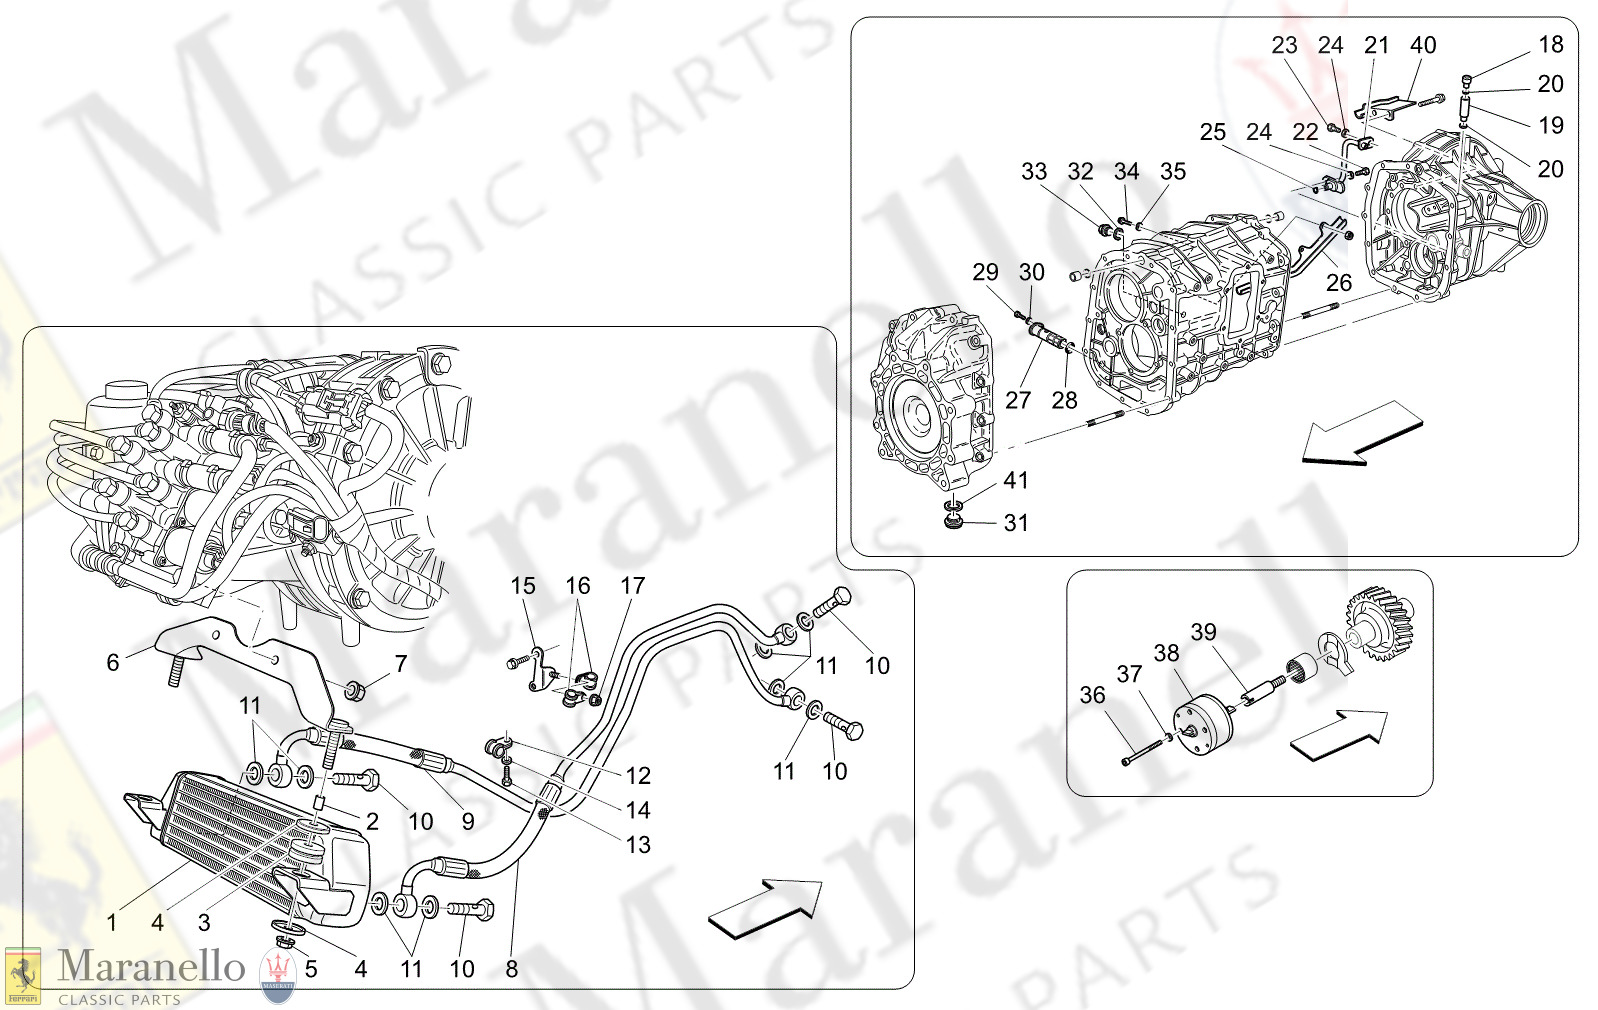 03.50 - 11 - 0350 - 11 Lubrication And Gearbox Oil Cooling